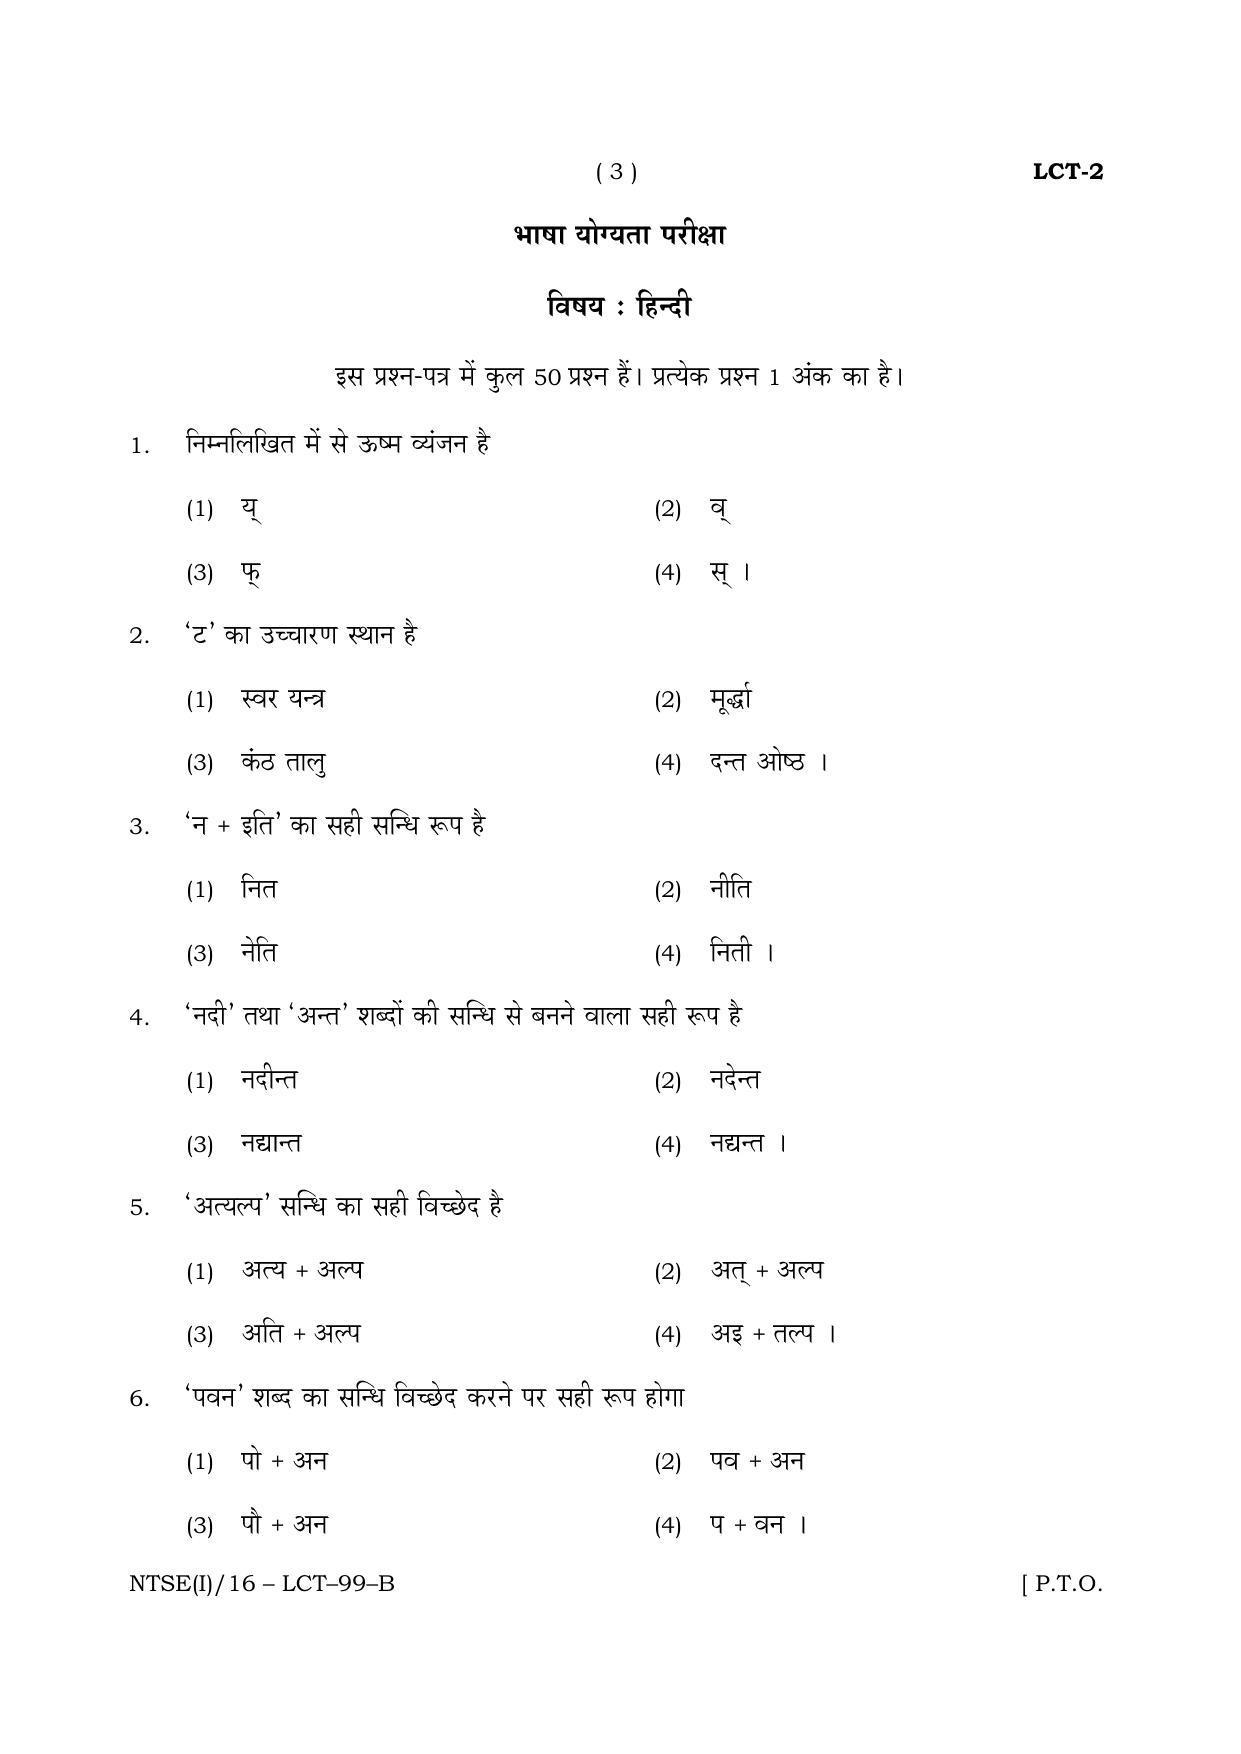 NTSE 2016 (Stage II) LCT Question Paper - Page 3